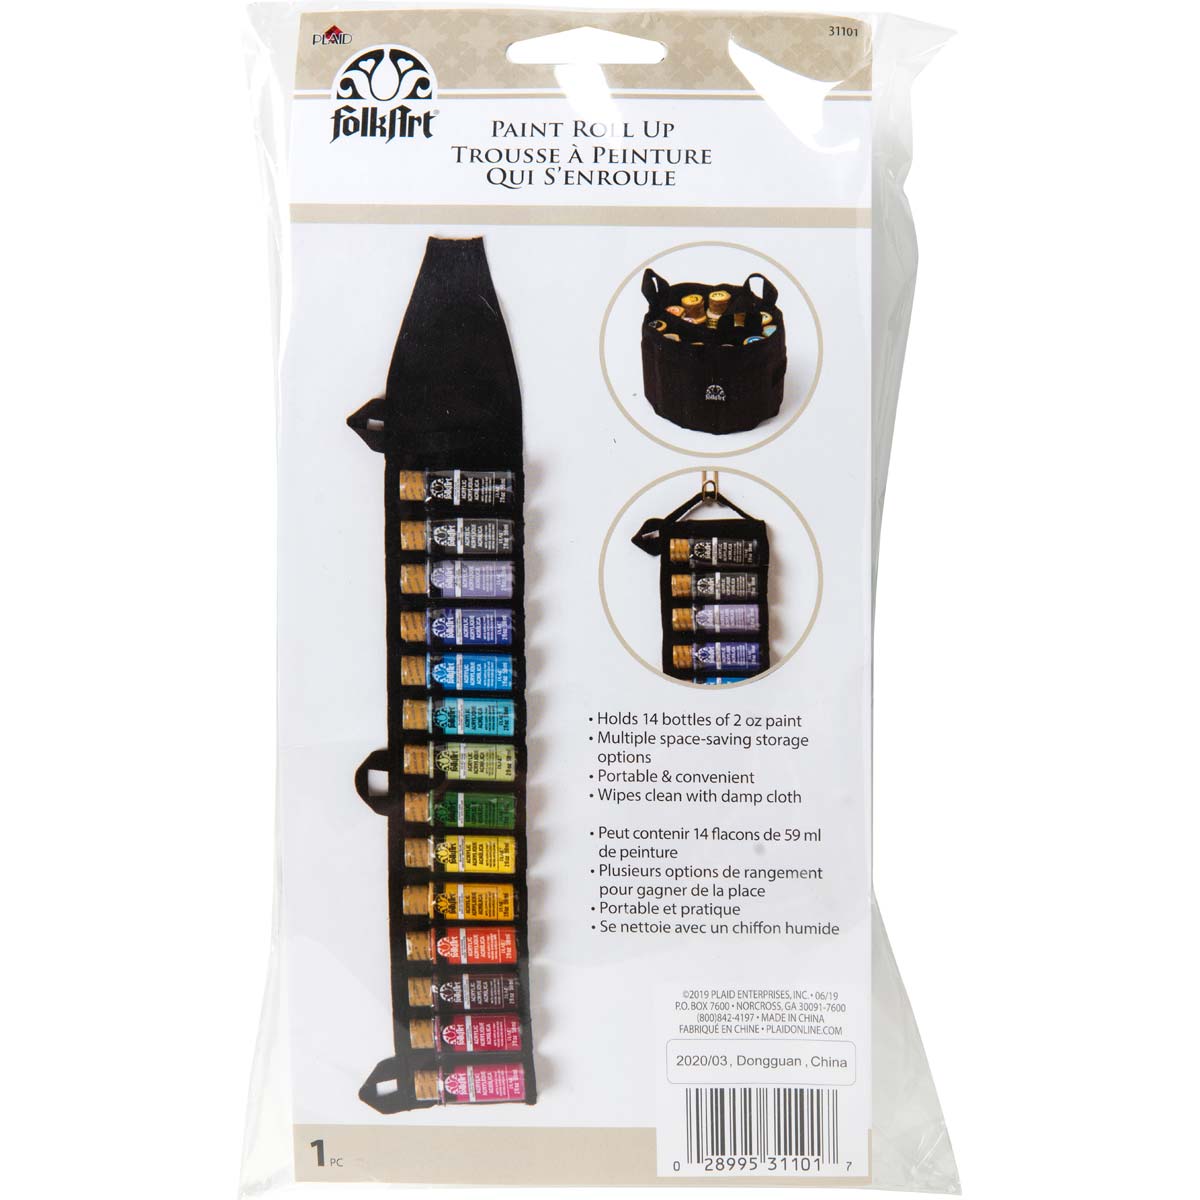 FolkArt ® Painting Tools - Paint Storage Roll-up - 31101